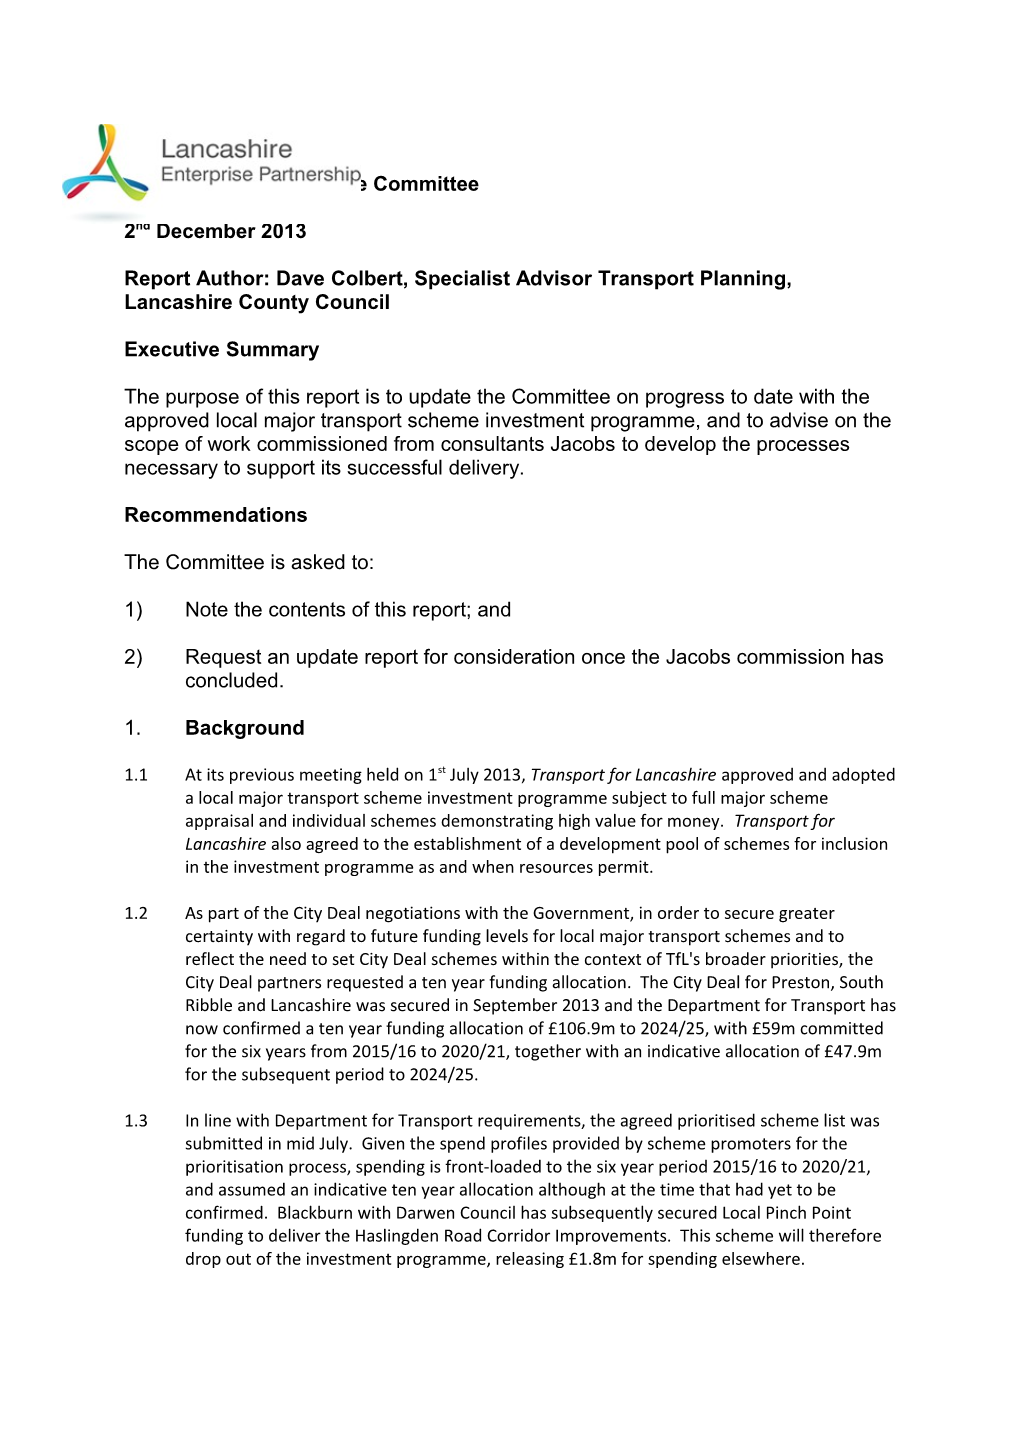 Transport for Lancashire Committee